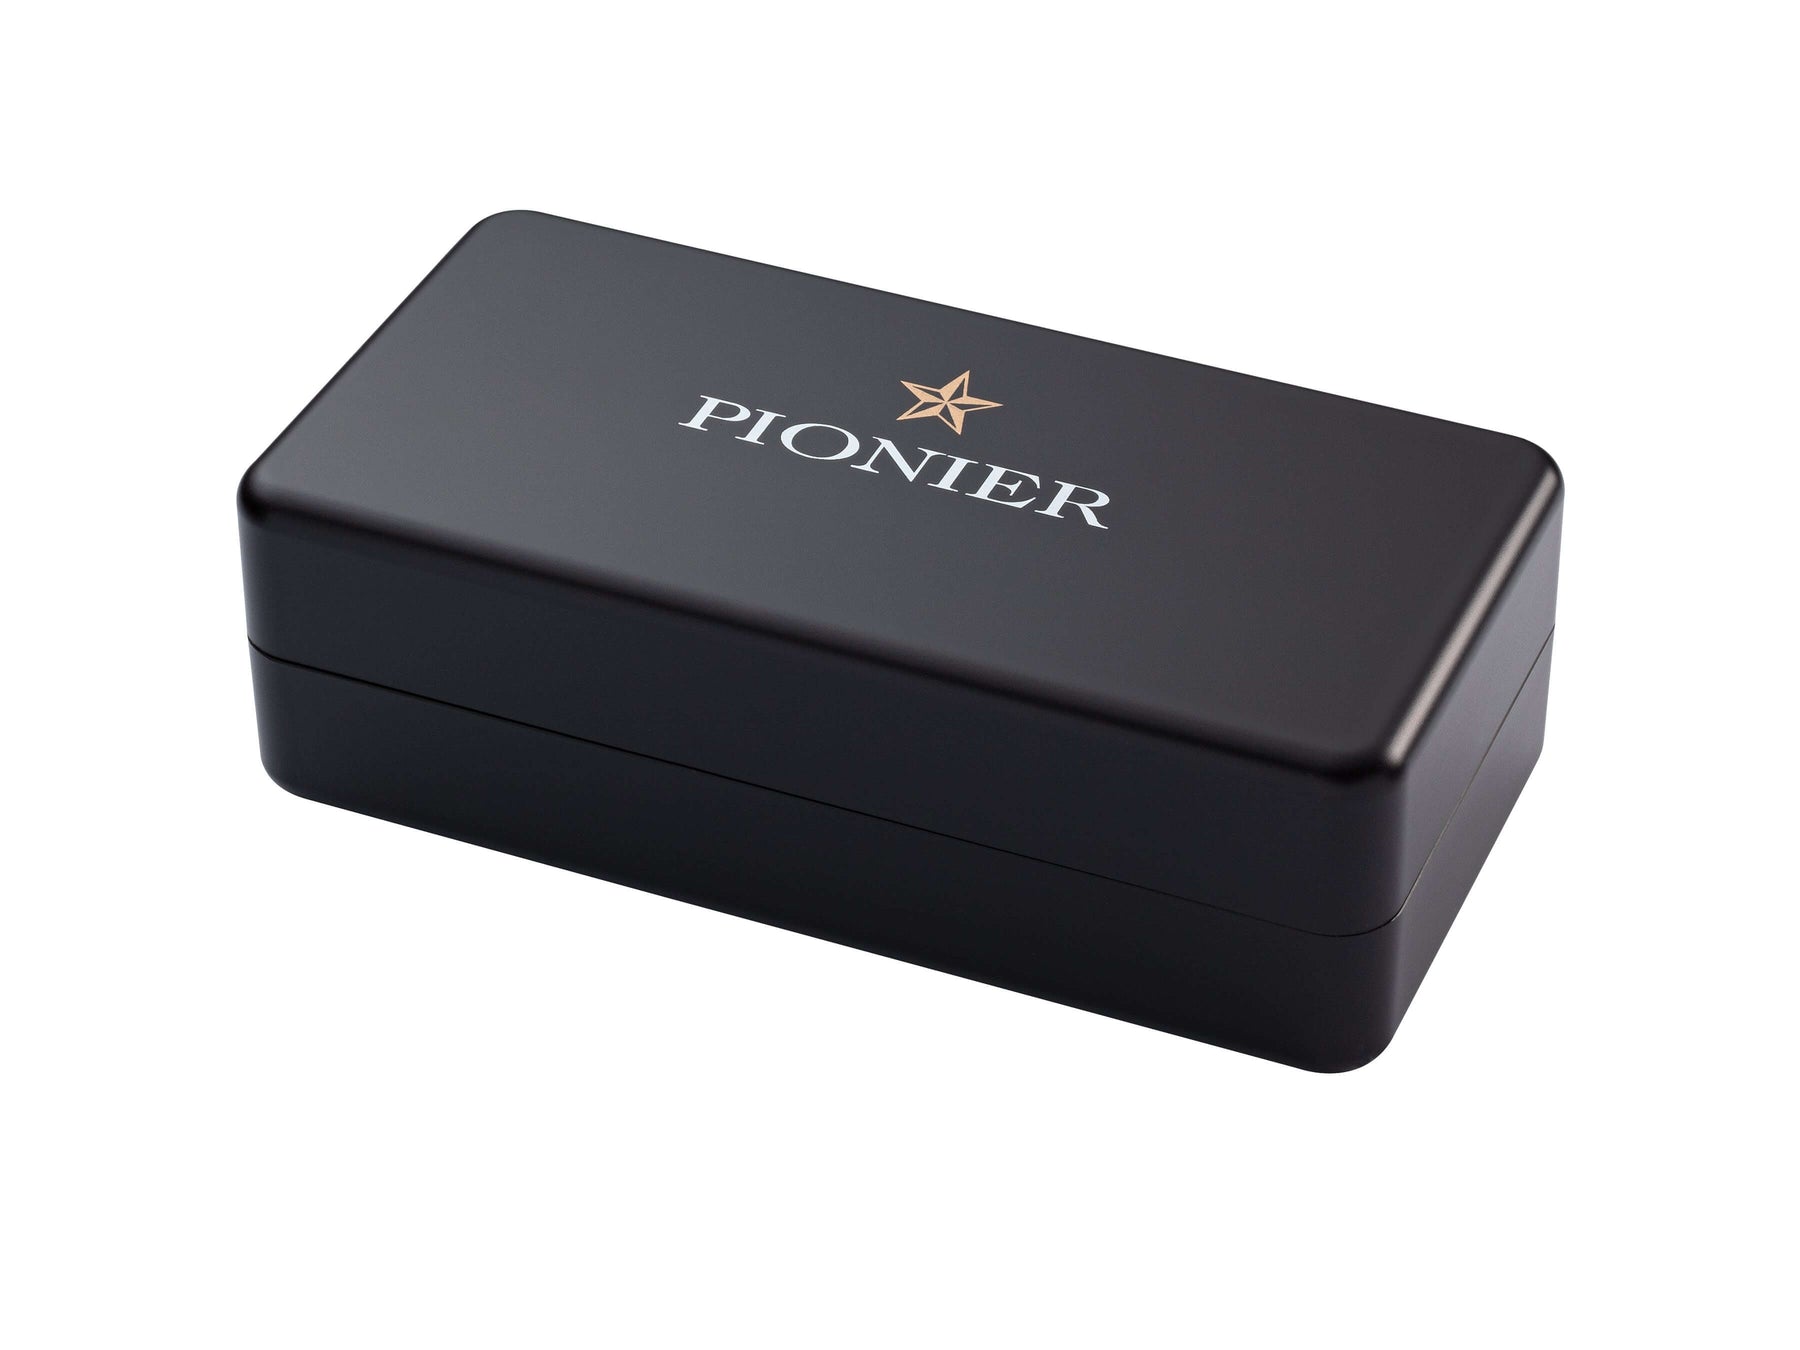 Original Pionier box with booklet, guarantee, and thank you card.